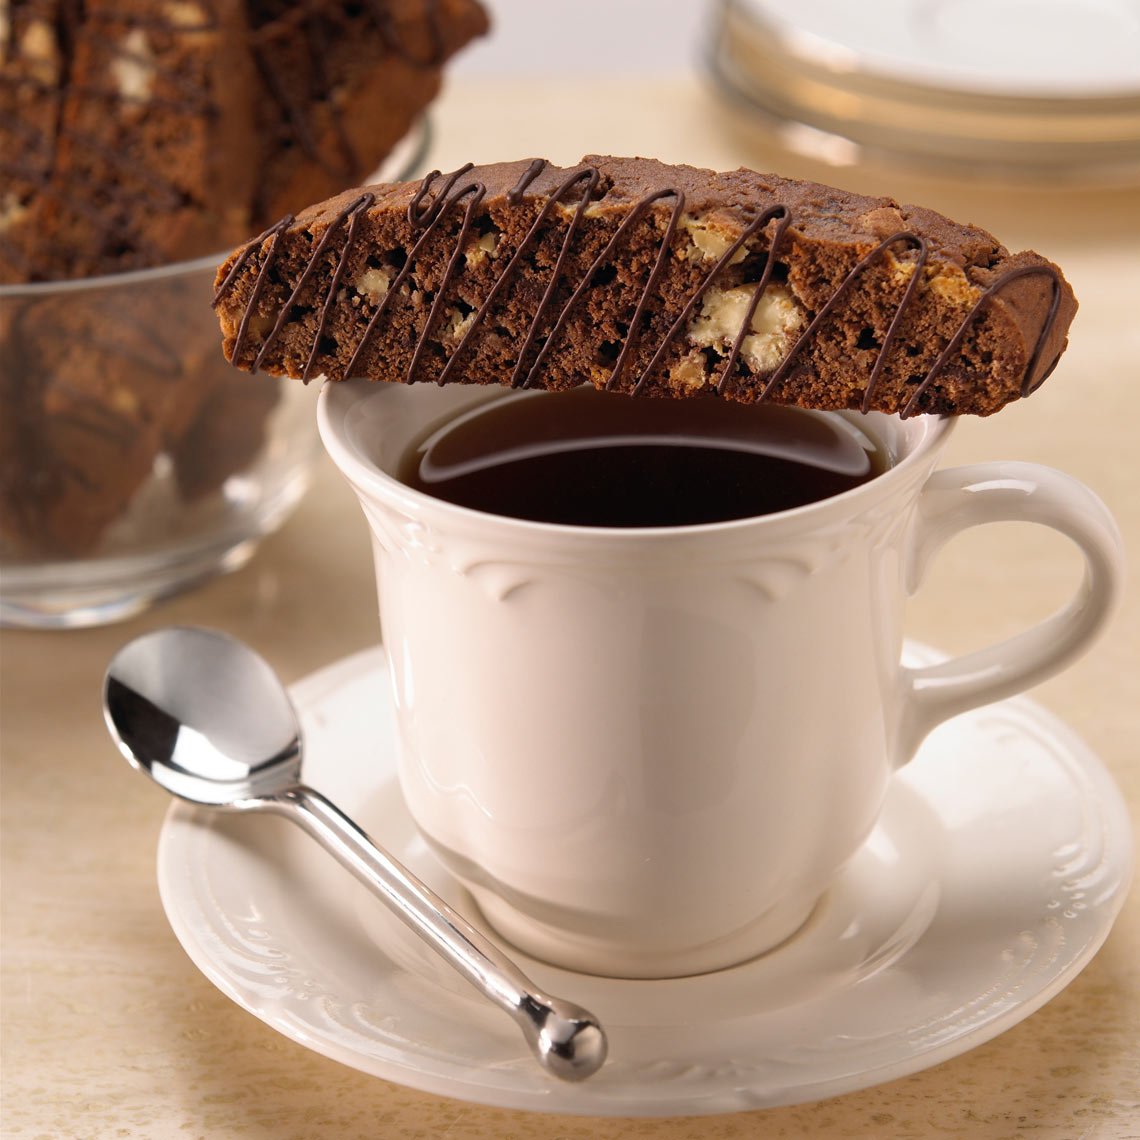 Biscotti and Coffee/white cup and saucer/food photography